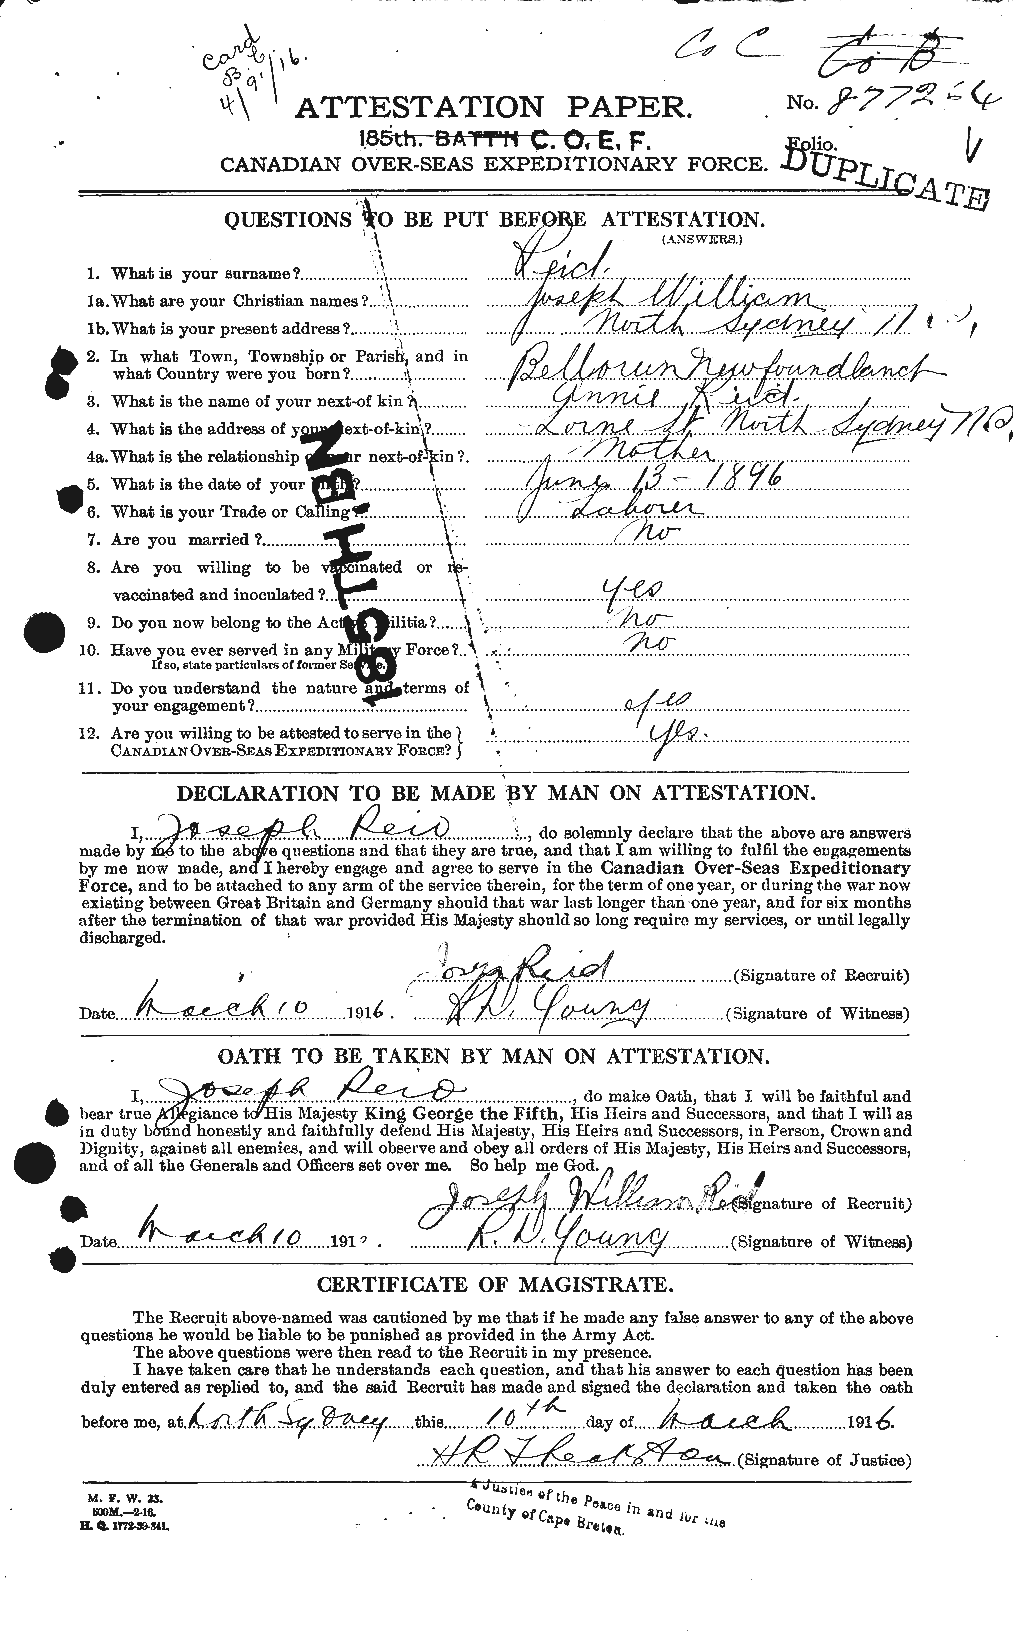 Personnel Records of the First World War - CEF 598904a